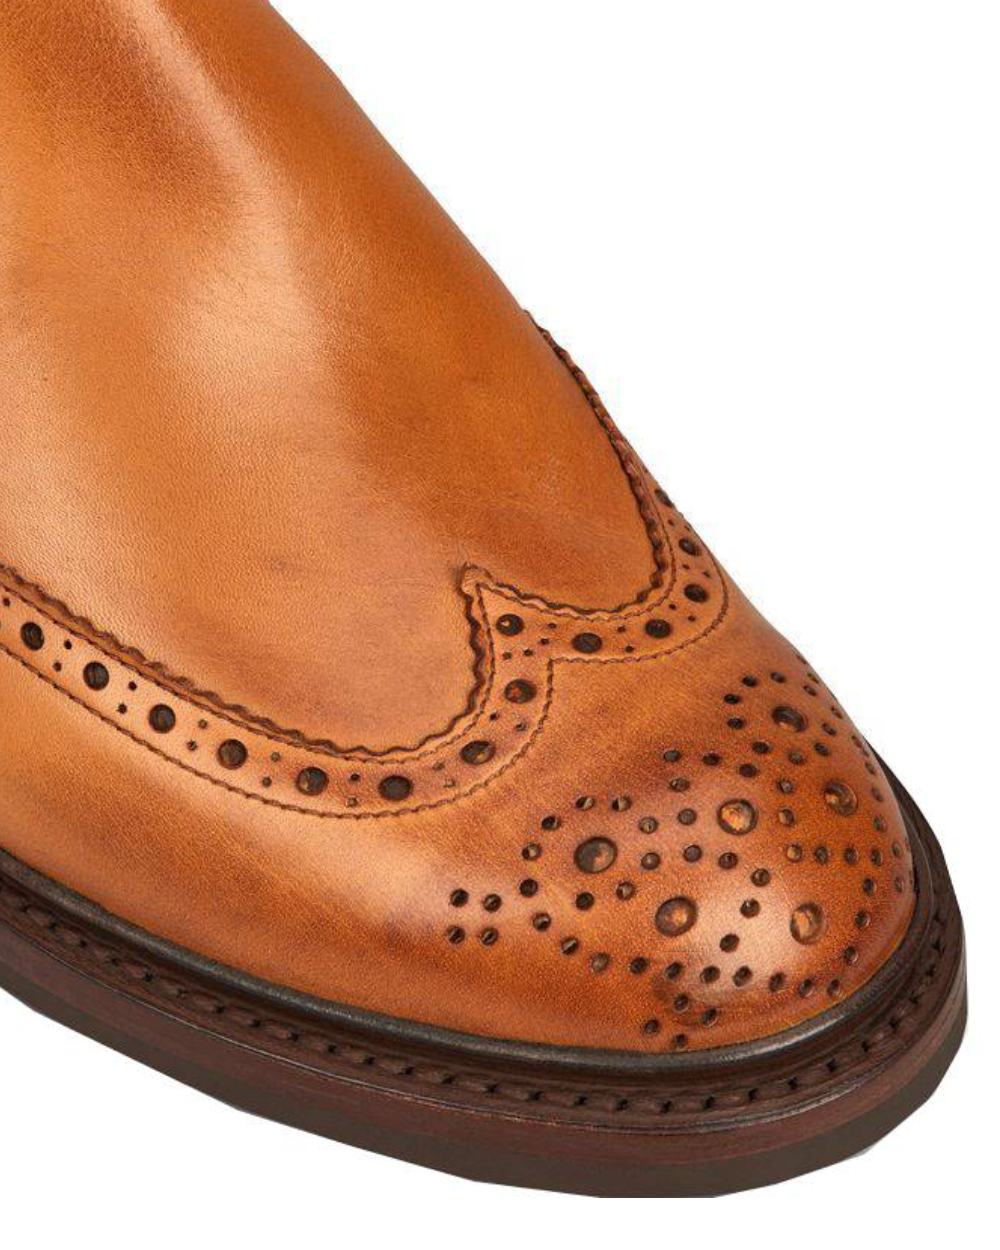 Burnished Coloured Trickers Henry Commando Sole Country Dealer Boot On A White Background 